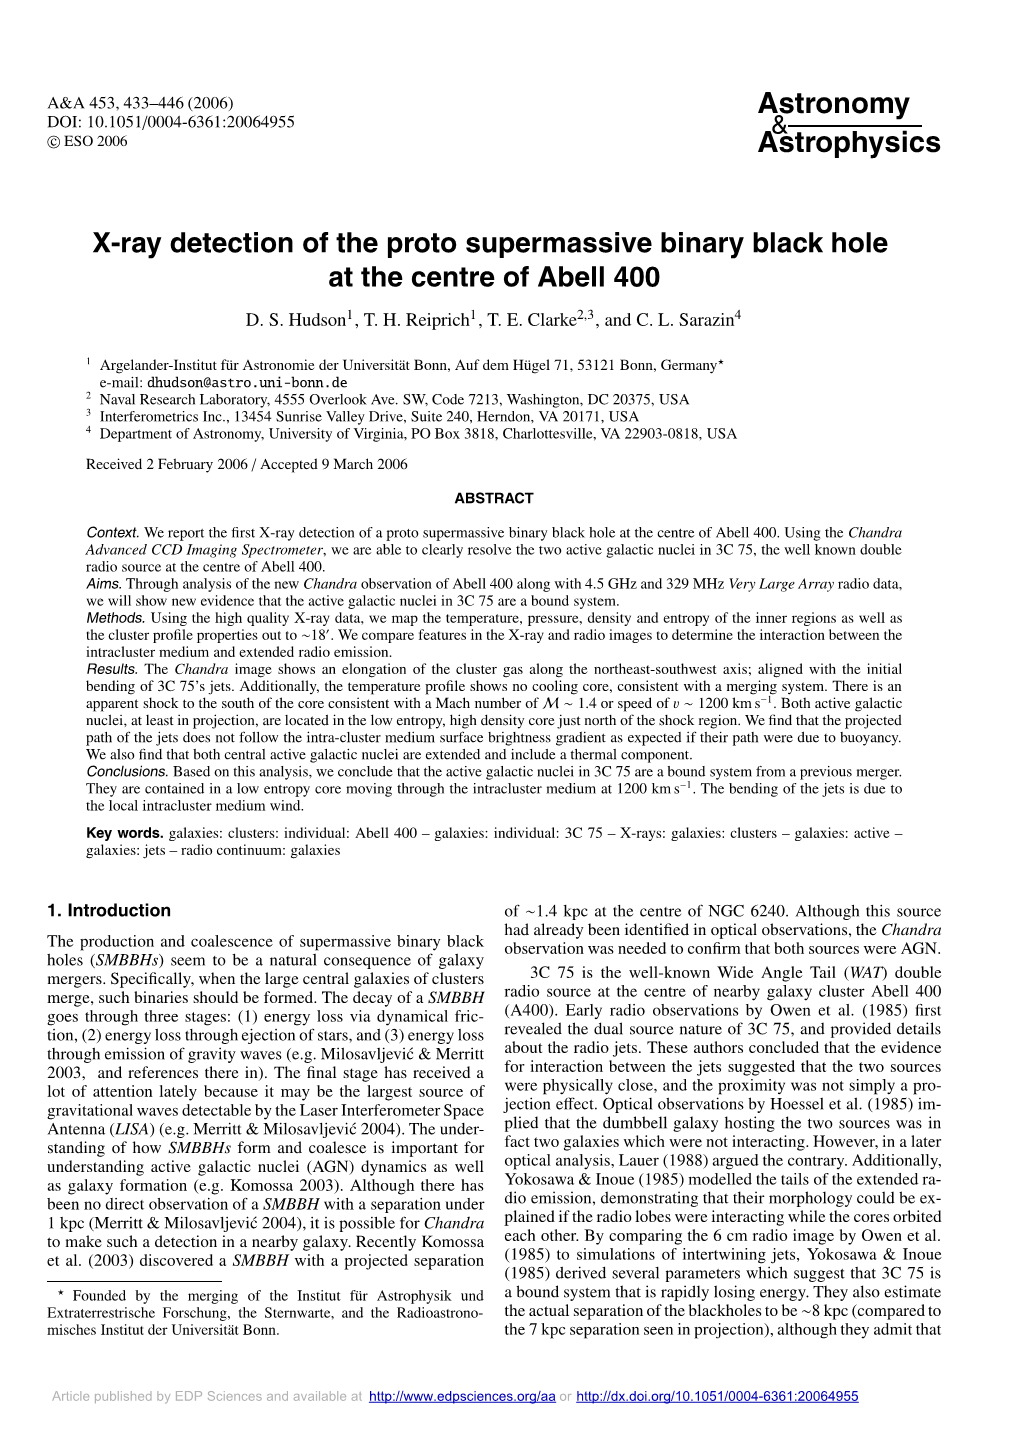 X-Ray Detection of the Proto Supermassive Binary Black Hole at the Centre of Abell 400